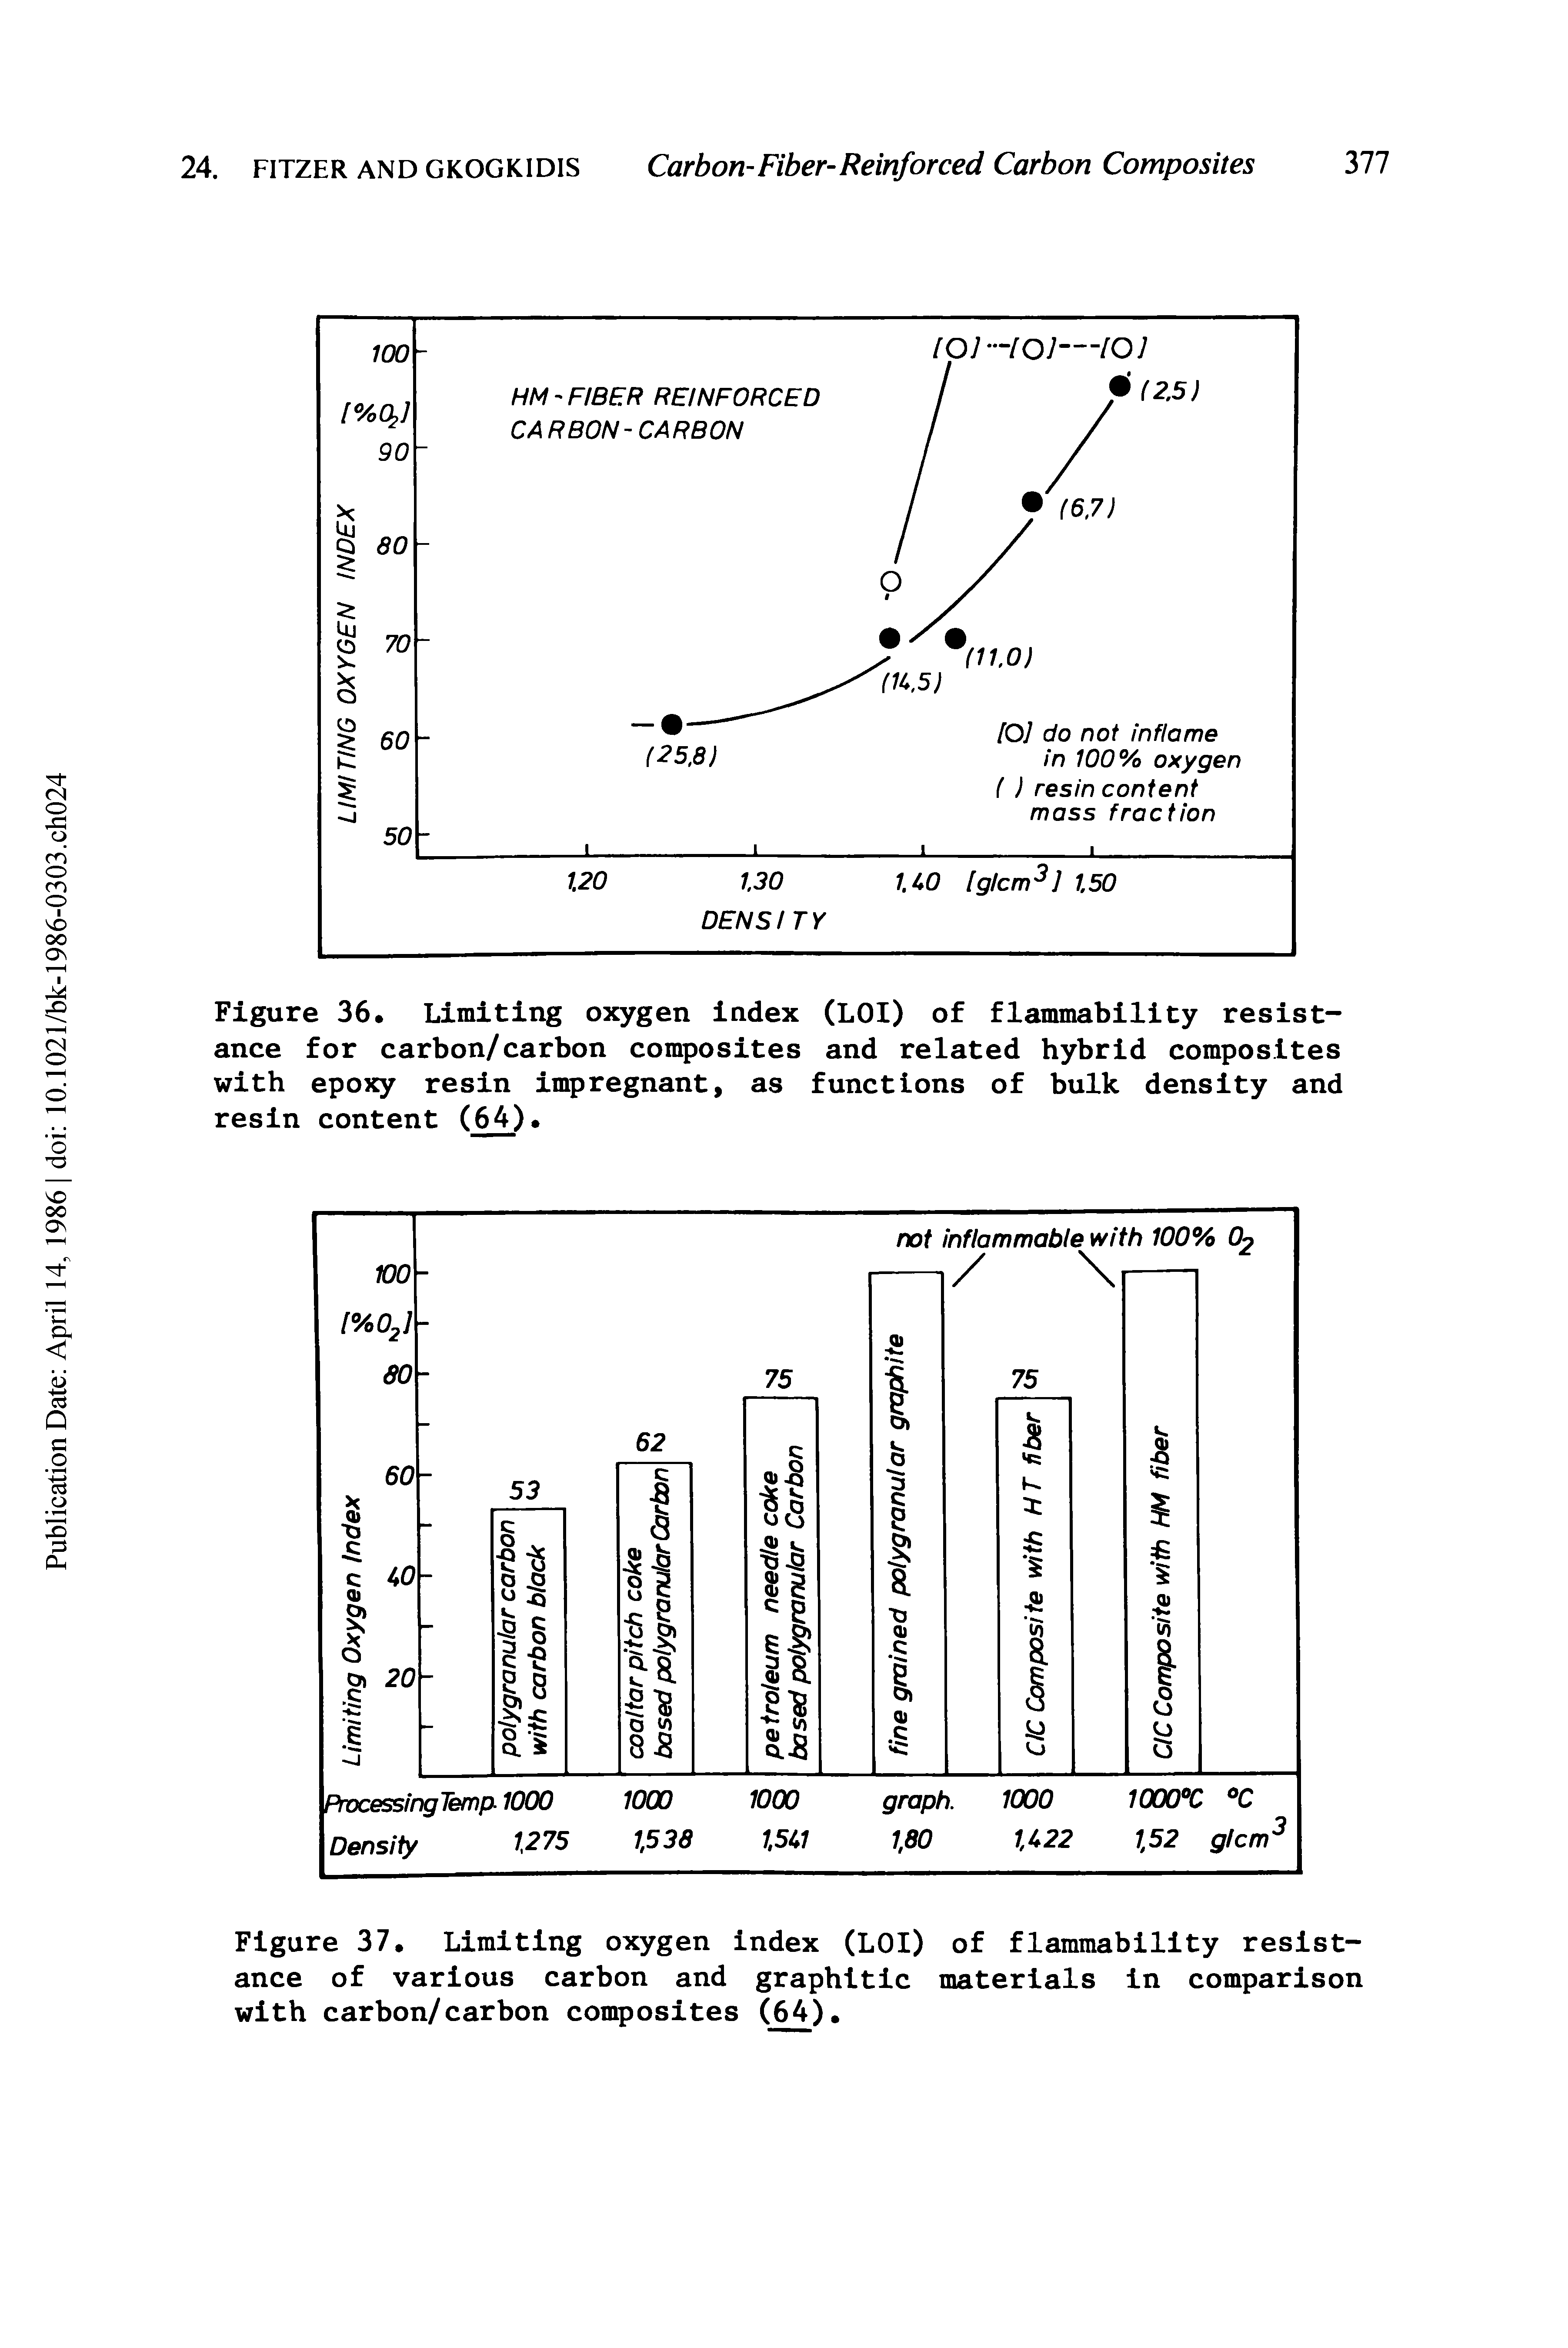 Figure 36. Limiting oxygen index (LOI) of flammability resistance for carbon/carbon composites and related hybrid composites with epoxy resin impregnant, as functions of bulk density and resin content (64).